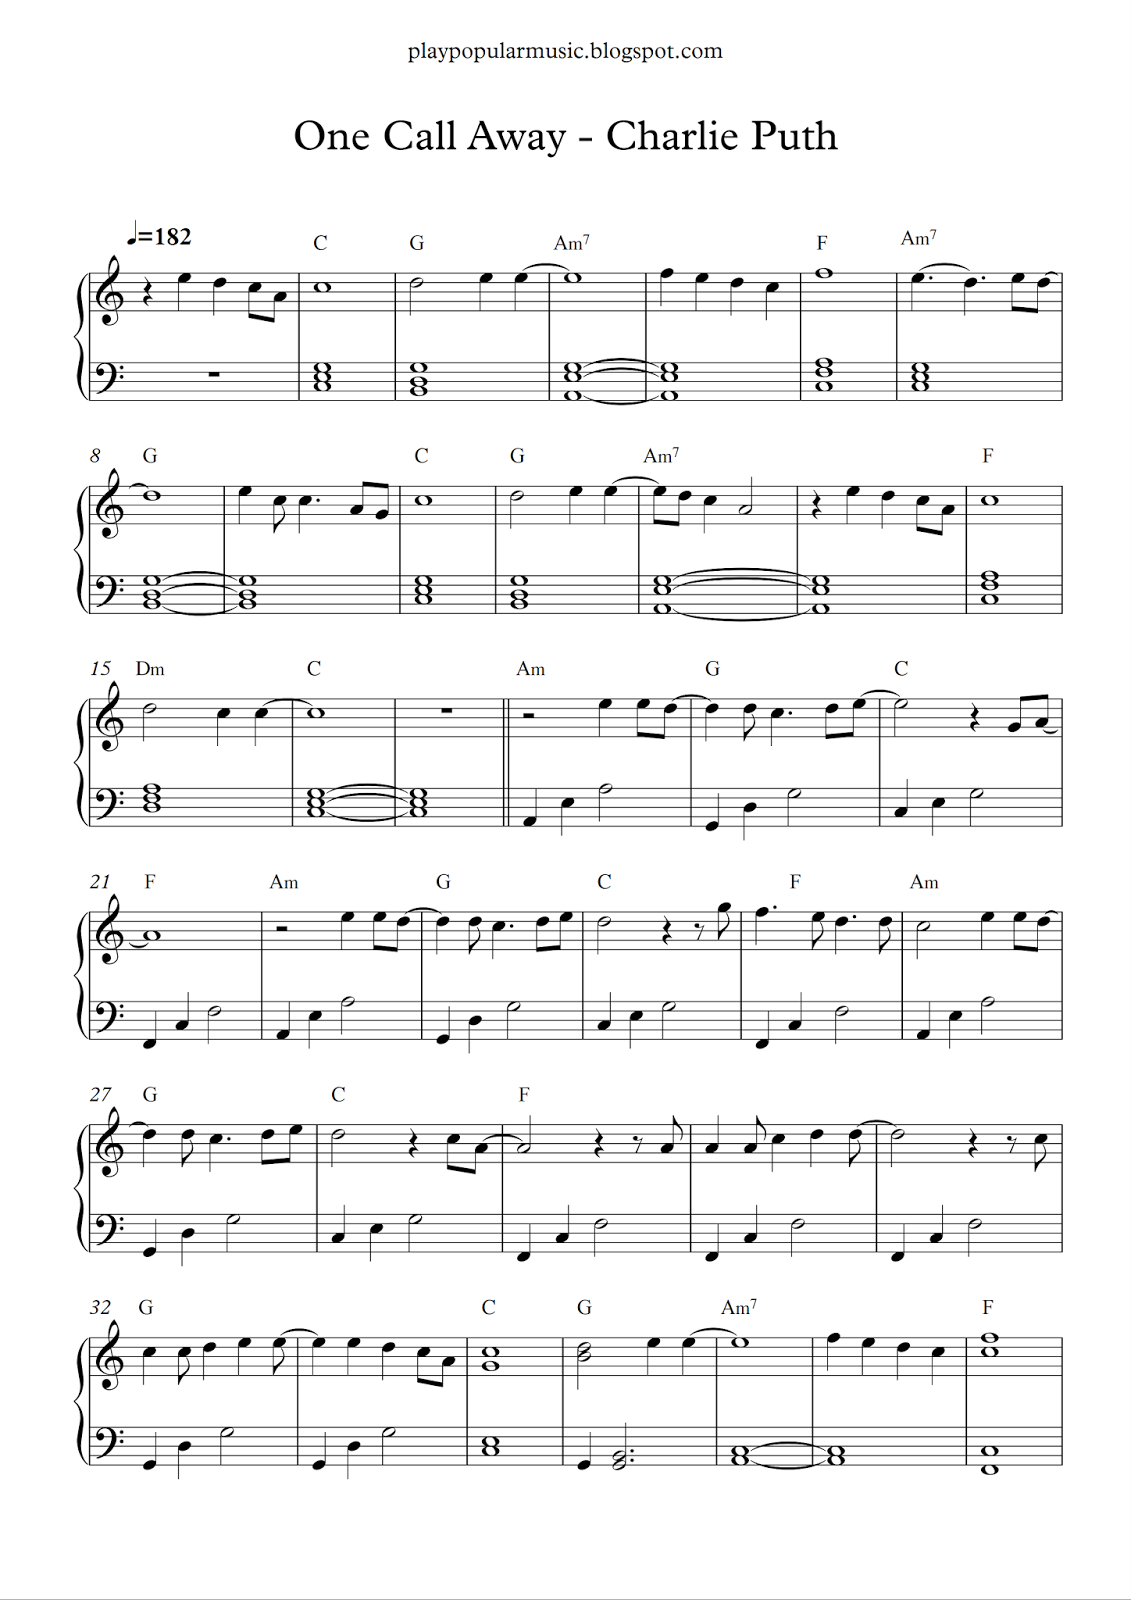 Free Piano Sheet Music: One Call Away - Charlie Puth.pdf I&amp;#039;m Only - Bad Day Piano Sheet Music Free Printable